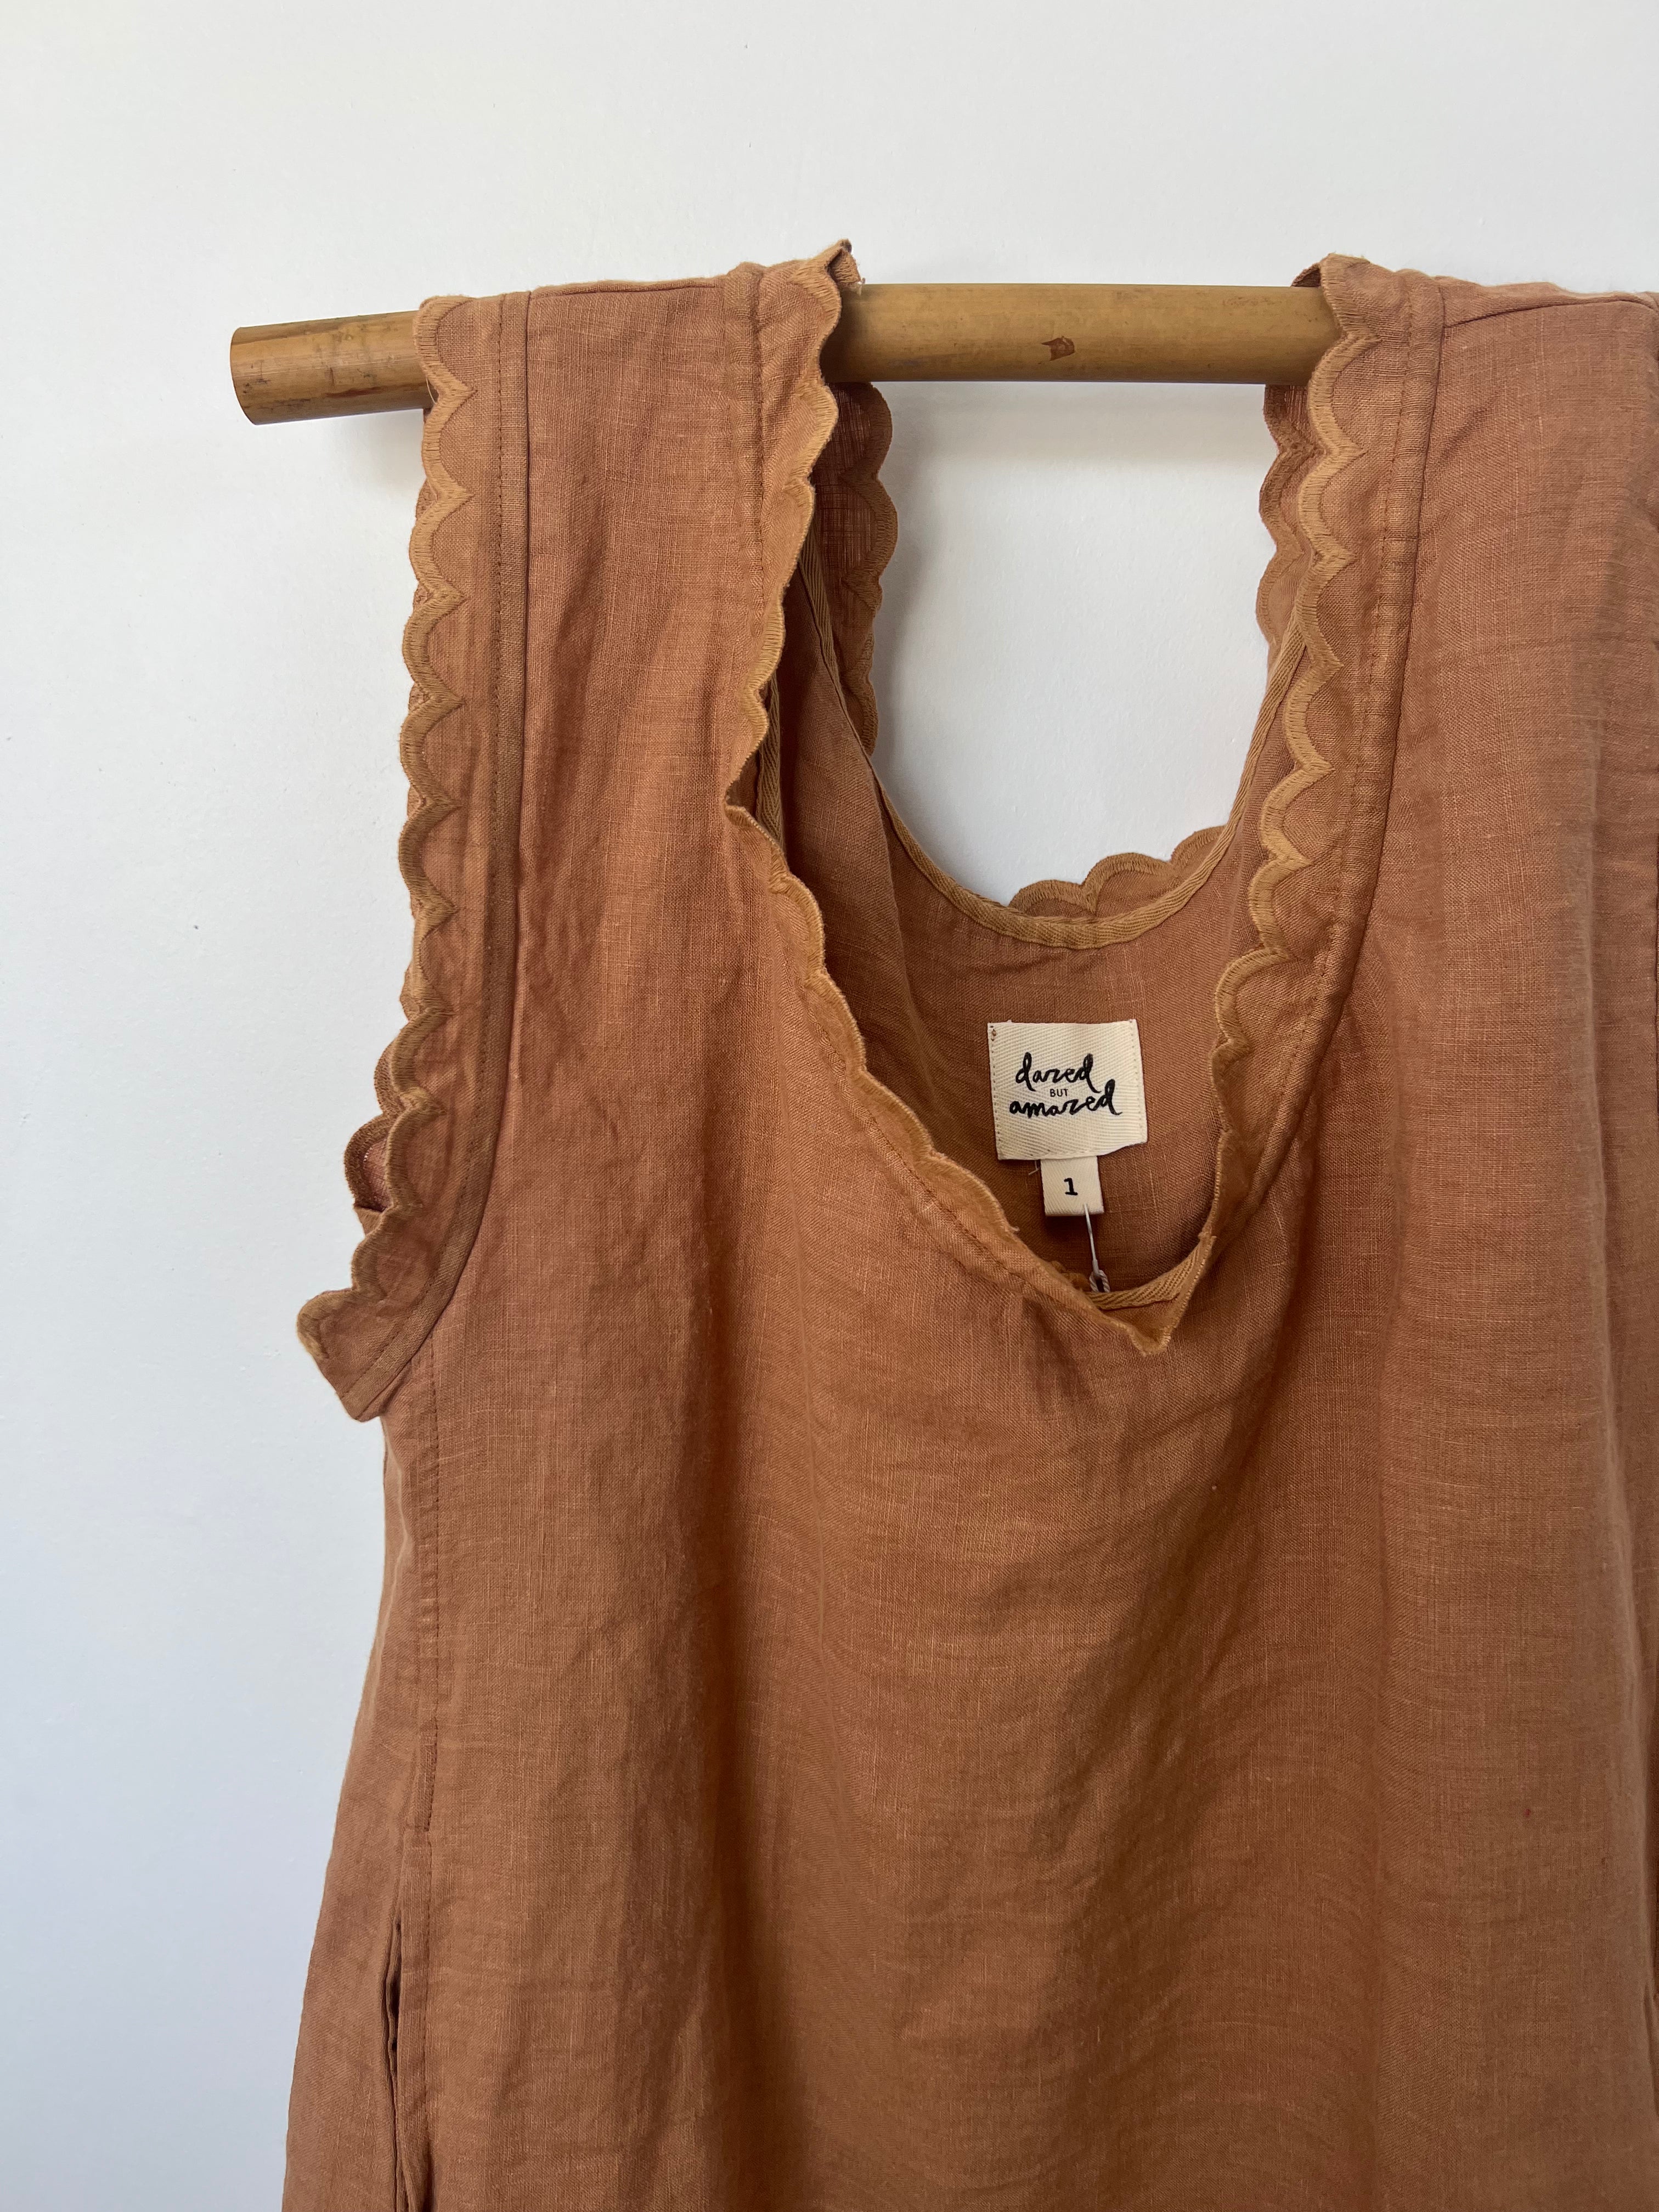 French Heritage Short Slip. Toffee